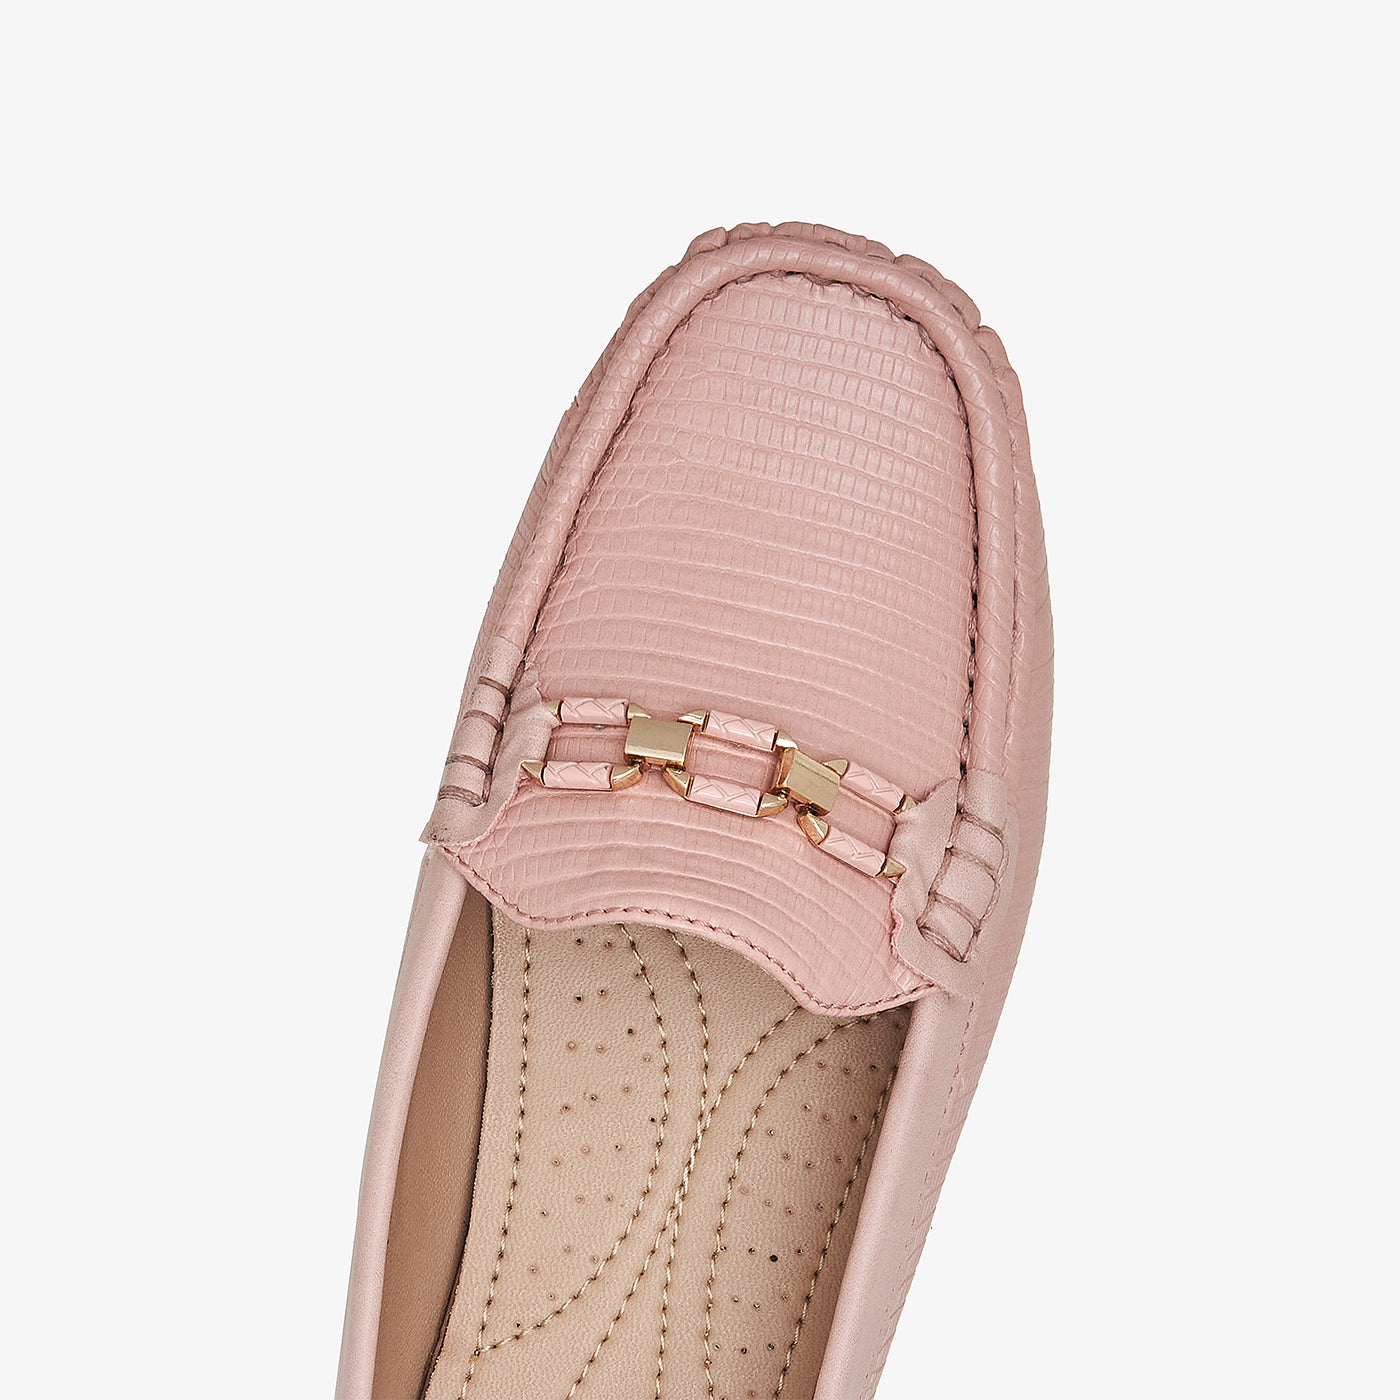 Women's Comfy Loafers